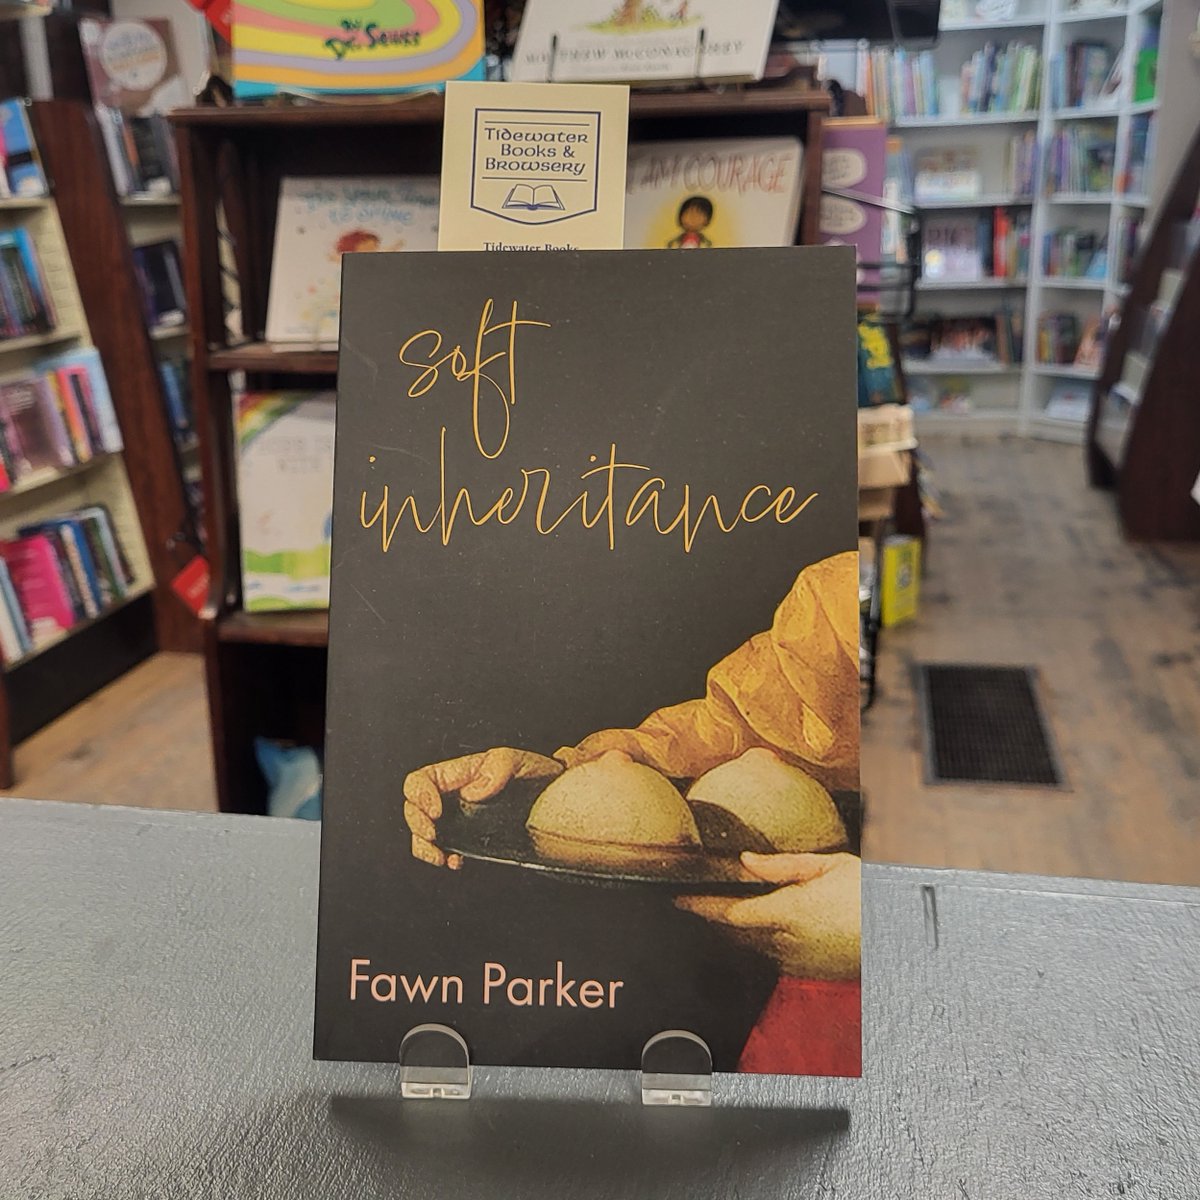 The other day we posted the three nominees for Writers' Federation of New Brunswick  The Fiddlehead Pottery prize, today we feature 'Soft Inheritance' by Fawn Parker💕🇨🇦📚
Visit us in person or online at tidewaterbooks.ca! 💕🇨🇦📚
#IReadCanadian #ShopSmall #ShopLocal #ShopNB